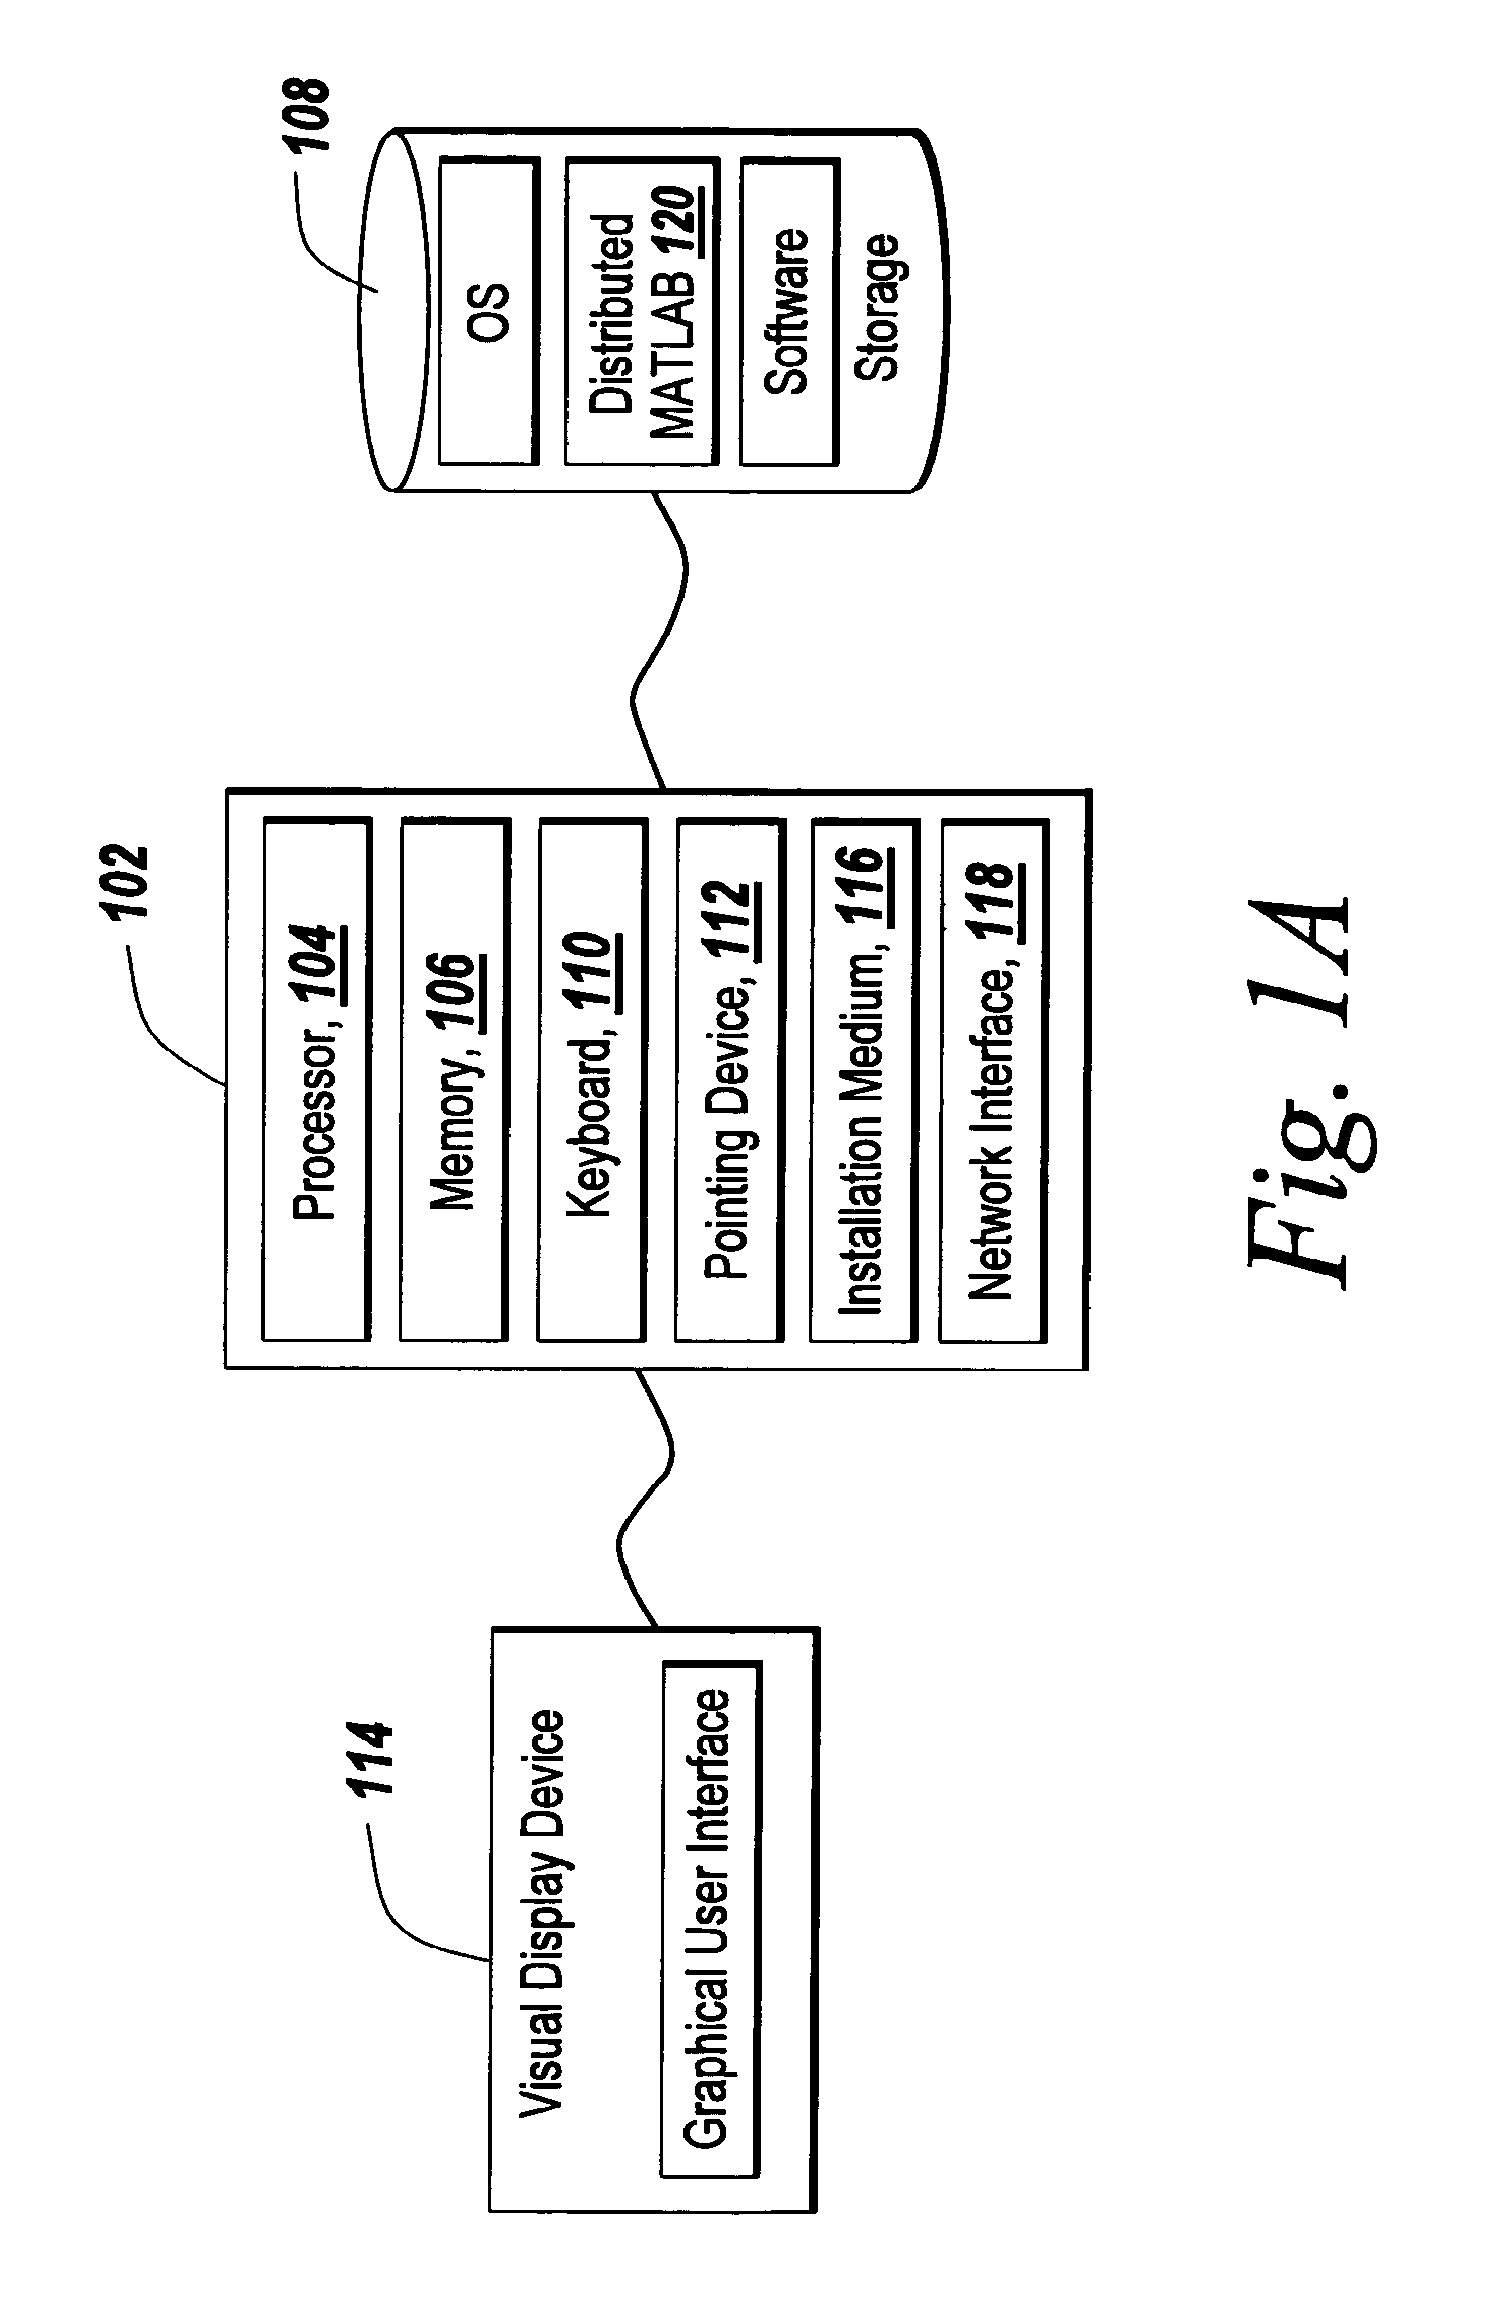 Methods and system for distributing technical computing tasks to technical computing workers